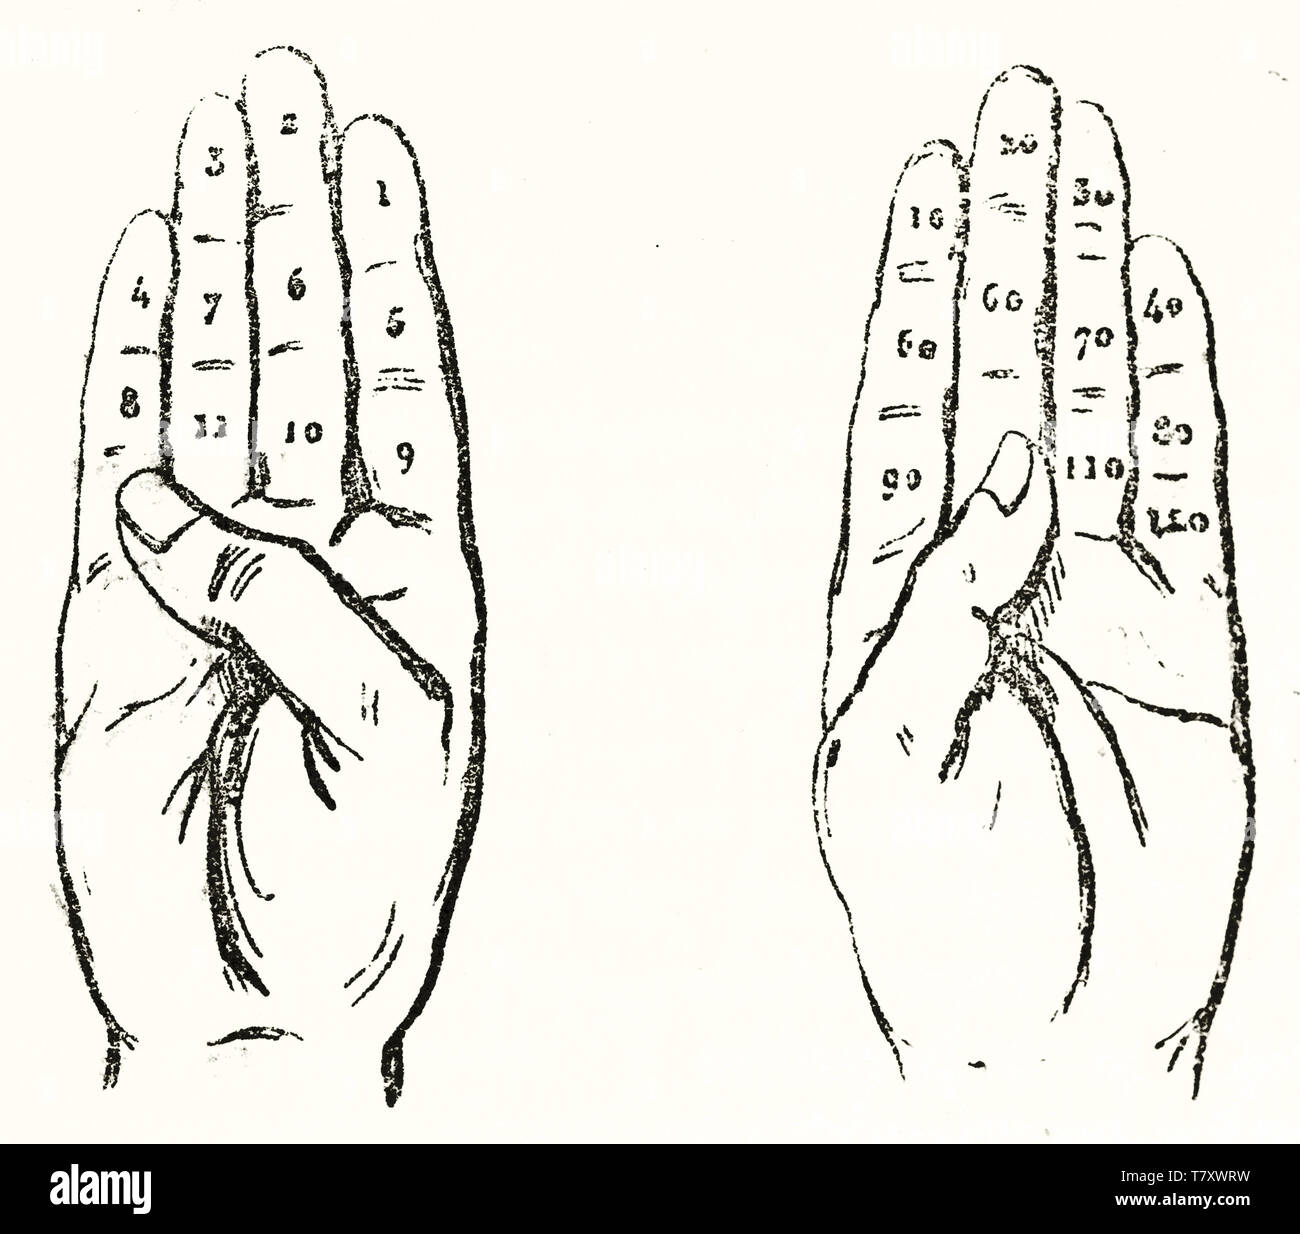 Left and right hand palm with numbers drawed on each finger. Old illustration about duodecimal calculation on fingers. Isolated elements on white background. Magasin Pittoresque Paris 1848 Stock Photo